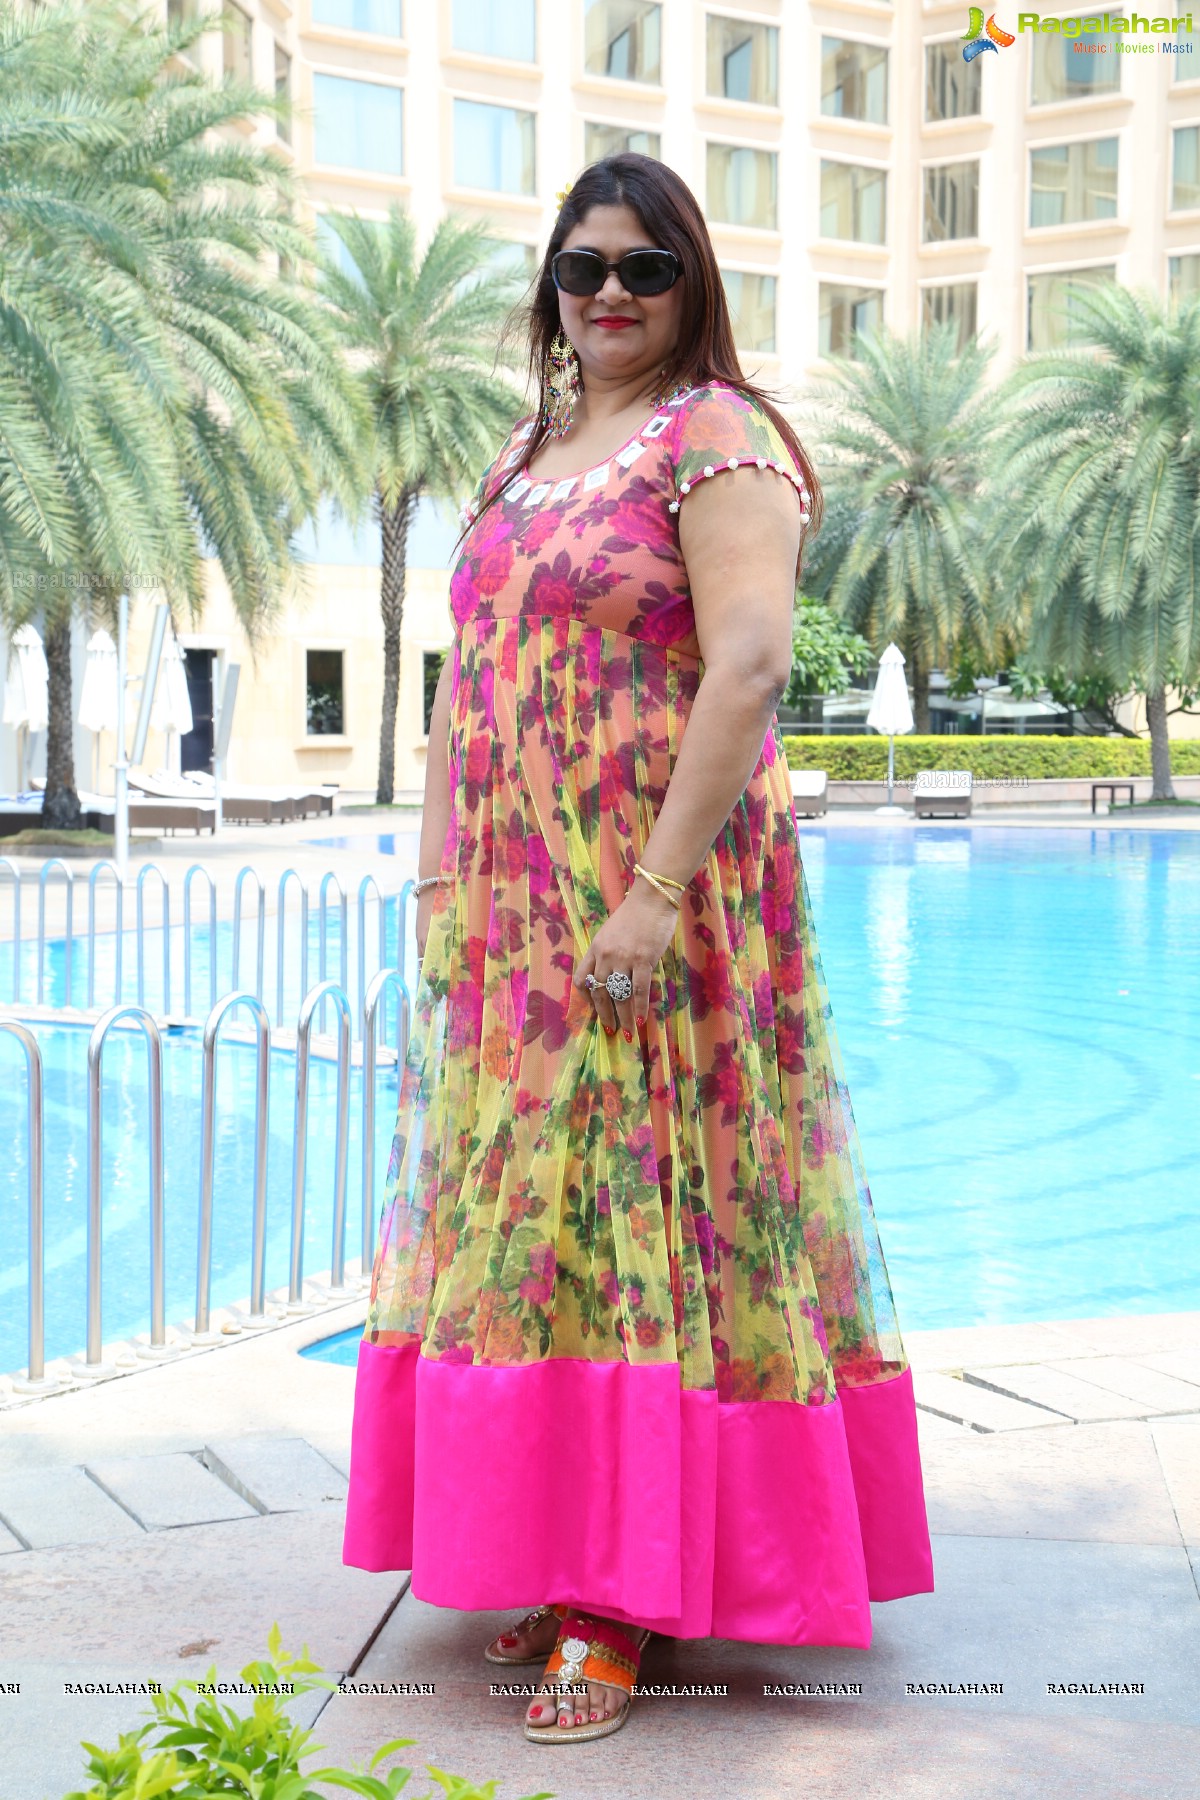 Mexican Themed Party by Divinos Ladies Club at La Cantina - Novotel Hyderabad Convention Centre by Shilpa Chowdary and Manju Gamji